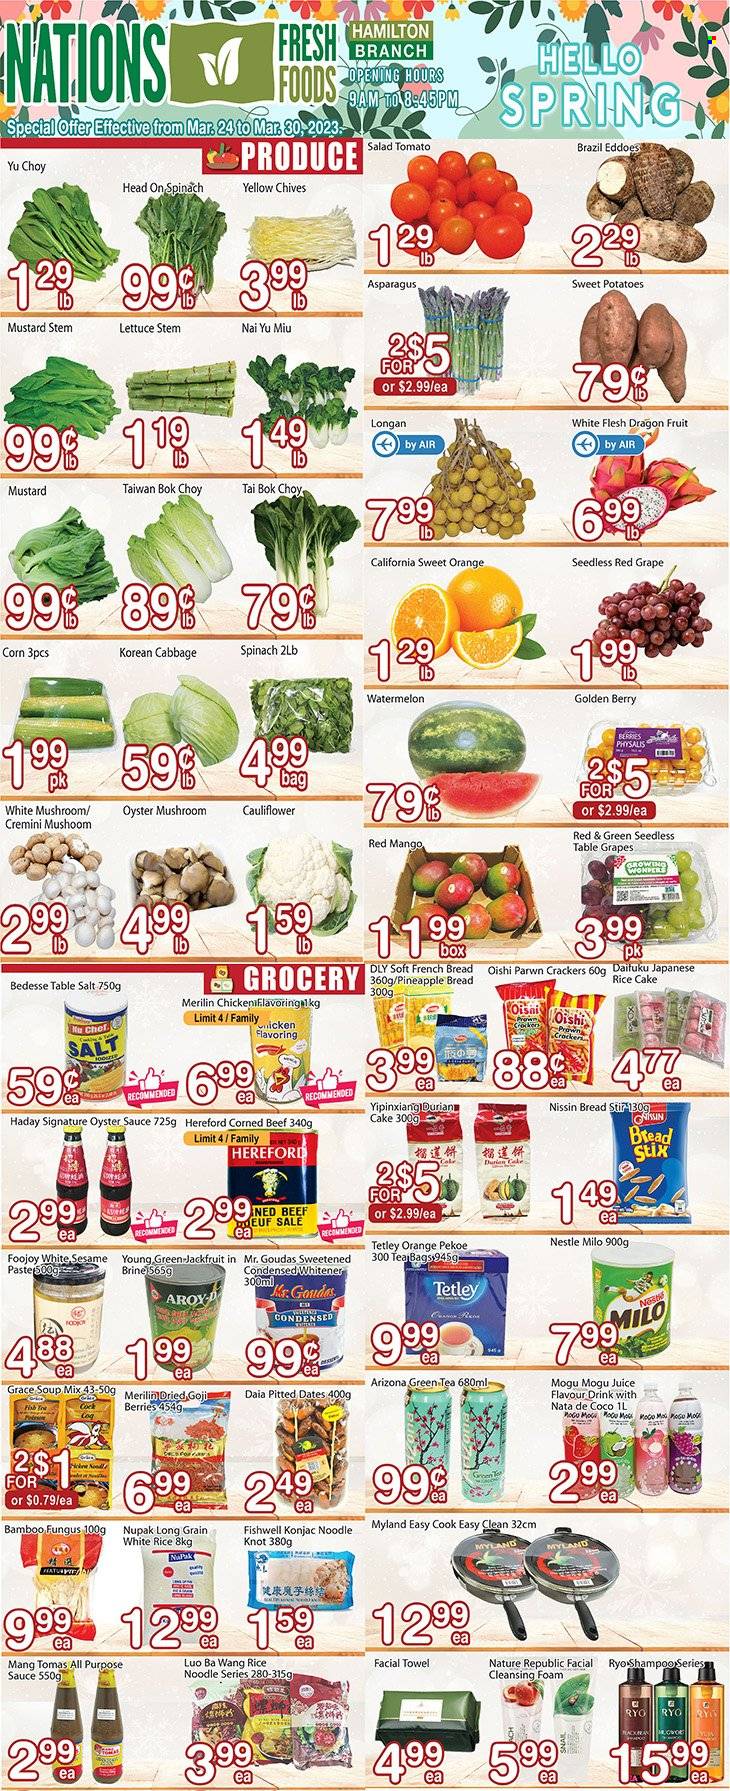 thumbnail - Nations Fresh Foods Flyer - March 24, 2023 - March 30, 2023 - Sales products - oyster mushrooms, bread, french bread, rice cakes, asparagus, bok choy, cabbage, corn, sweet potato, potatoes, lettuce, soup mix, salad, chives, eddoe, mango, watermelon, pineapple, dragon fruit, fish, soup, sauce, Nissin, corned beef, Milo, crackers, salt, white rice, mustard, oyster sauce, dried fruit, goji, dried dates, juice, AriZona, green tea, tea bags, shampoo, cleansing foam, Nestlé. Page 1.